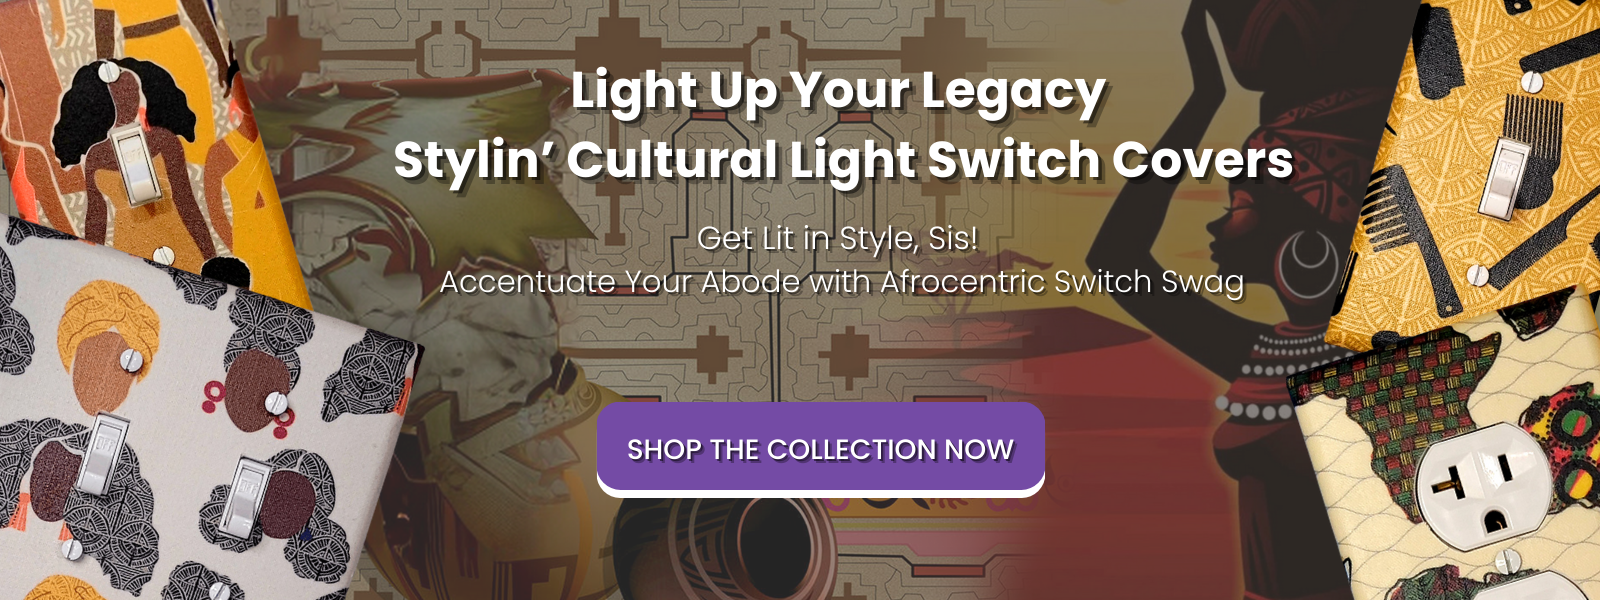 Light Up Your Legacy   Stylin’ Cultural Light Switch Covers     "Get Lit in Style, Sis! – Accentuate Your Abode with Afrocentric Switch Swag"